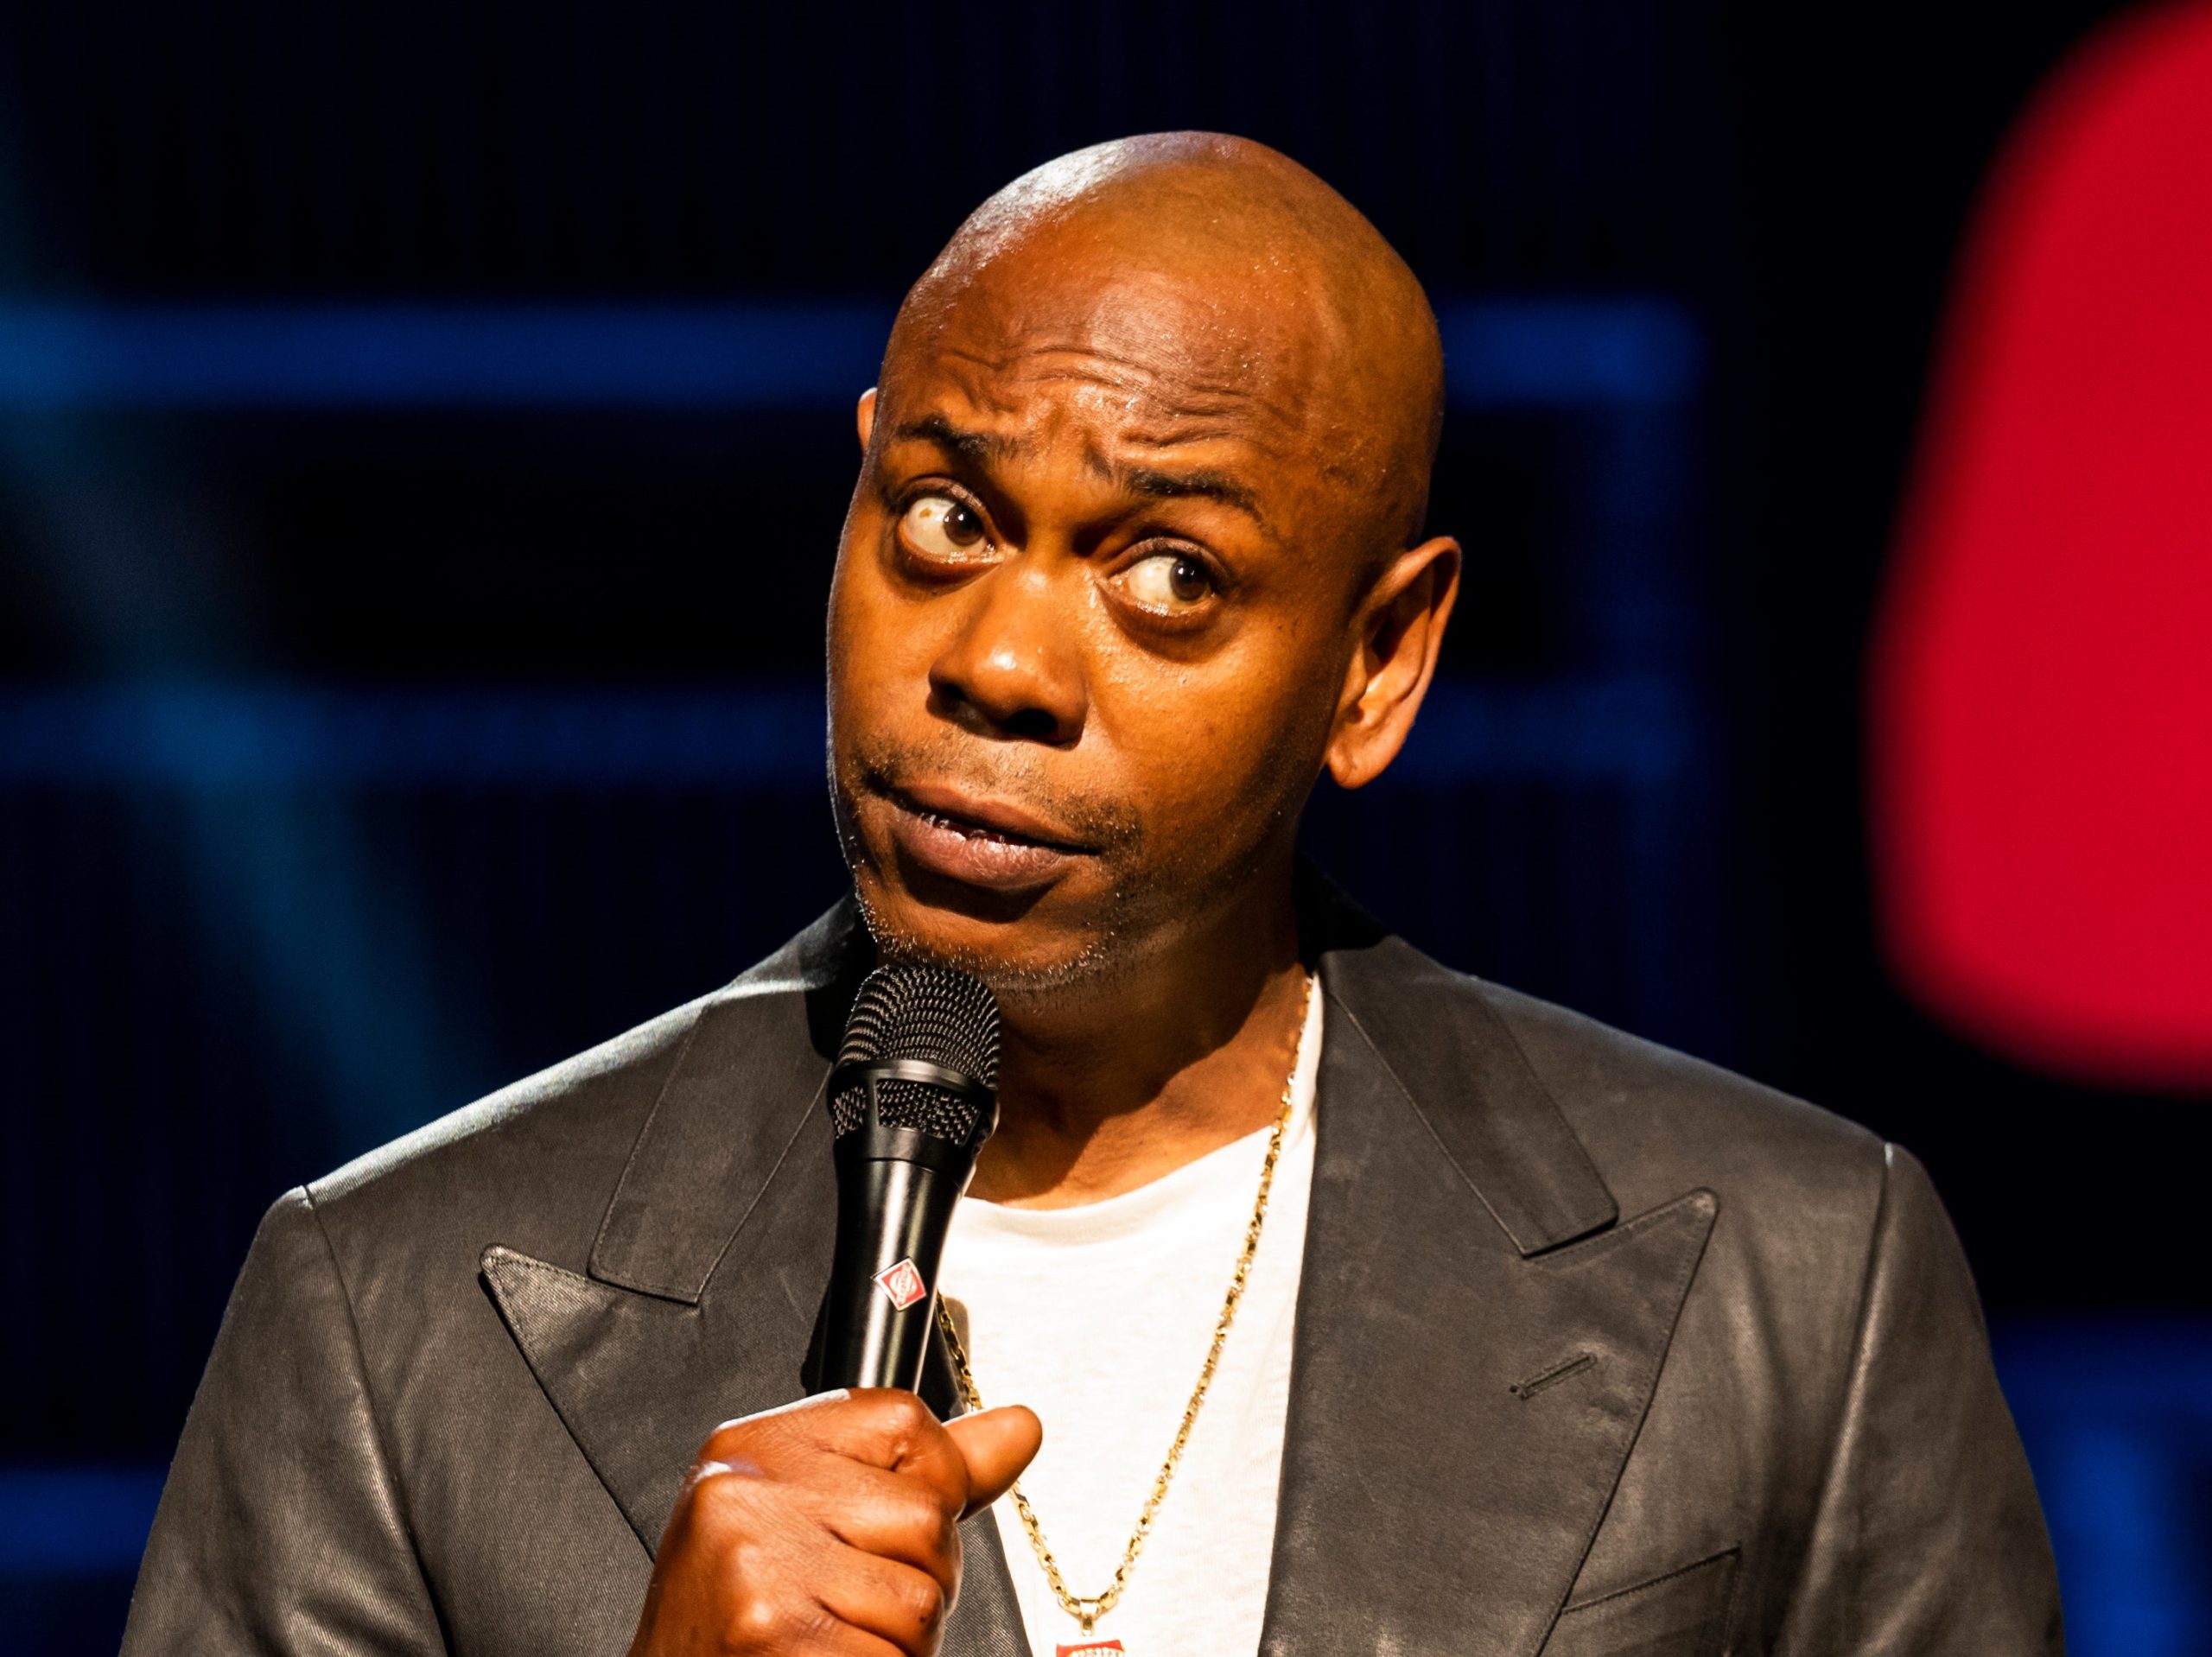 Dave Chappelle is facing further backlash following an old high school visit. ‘I’m better than all of you’